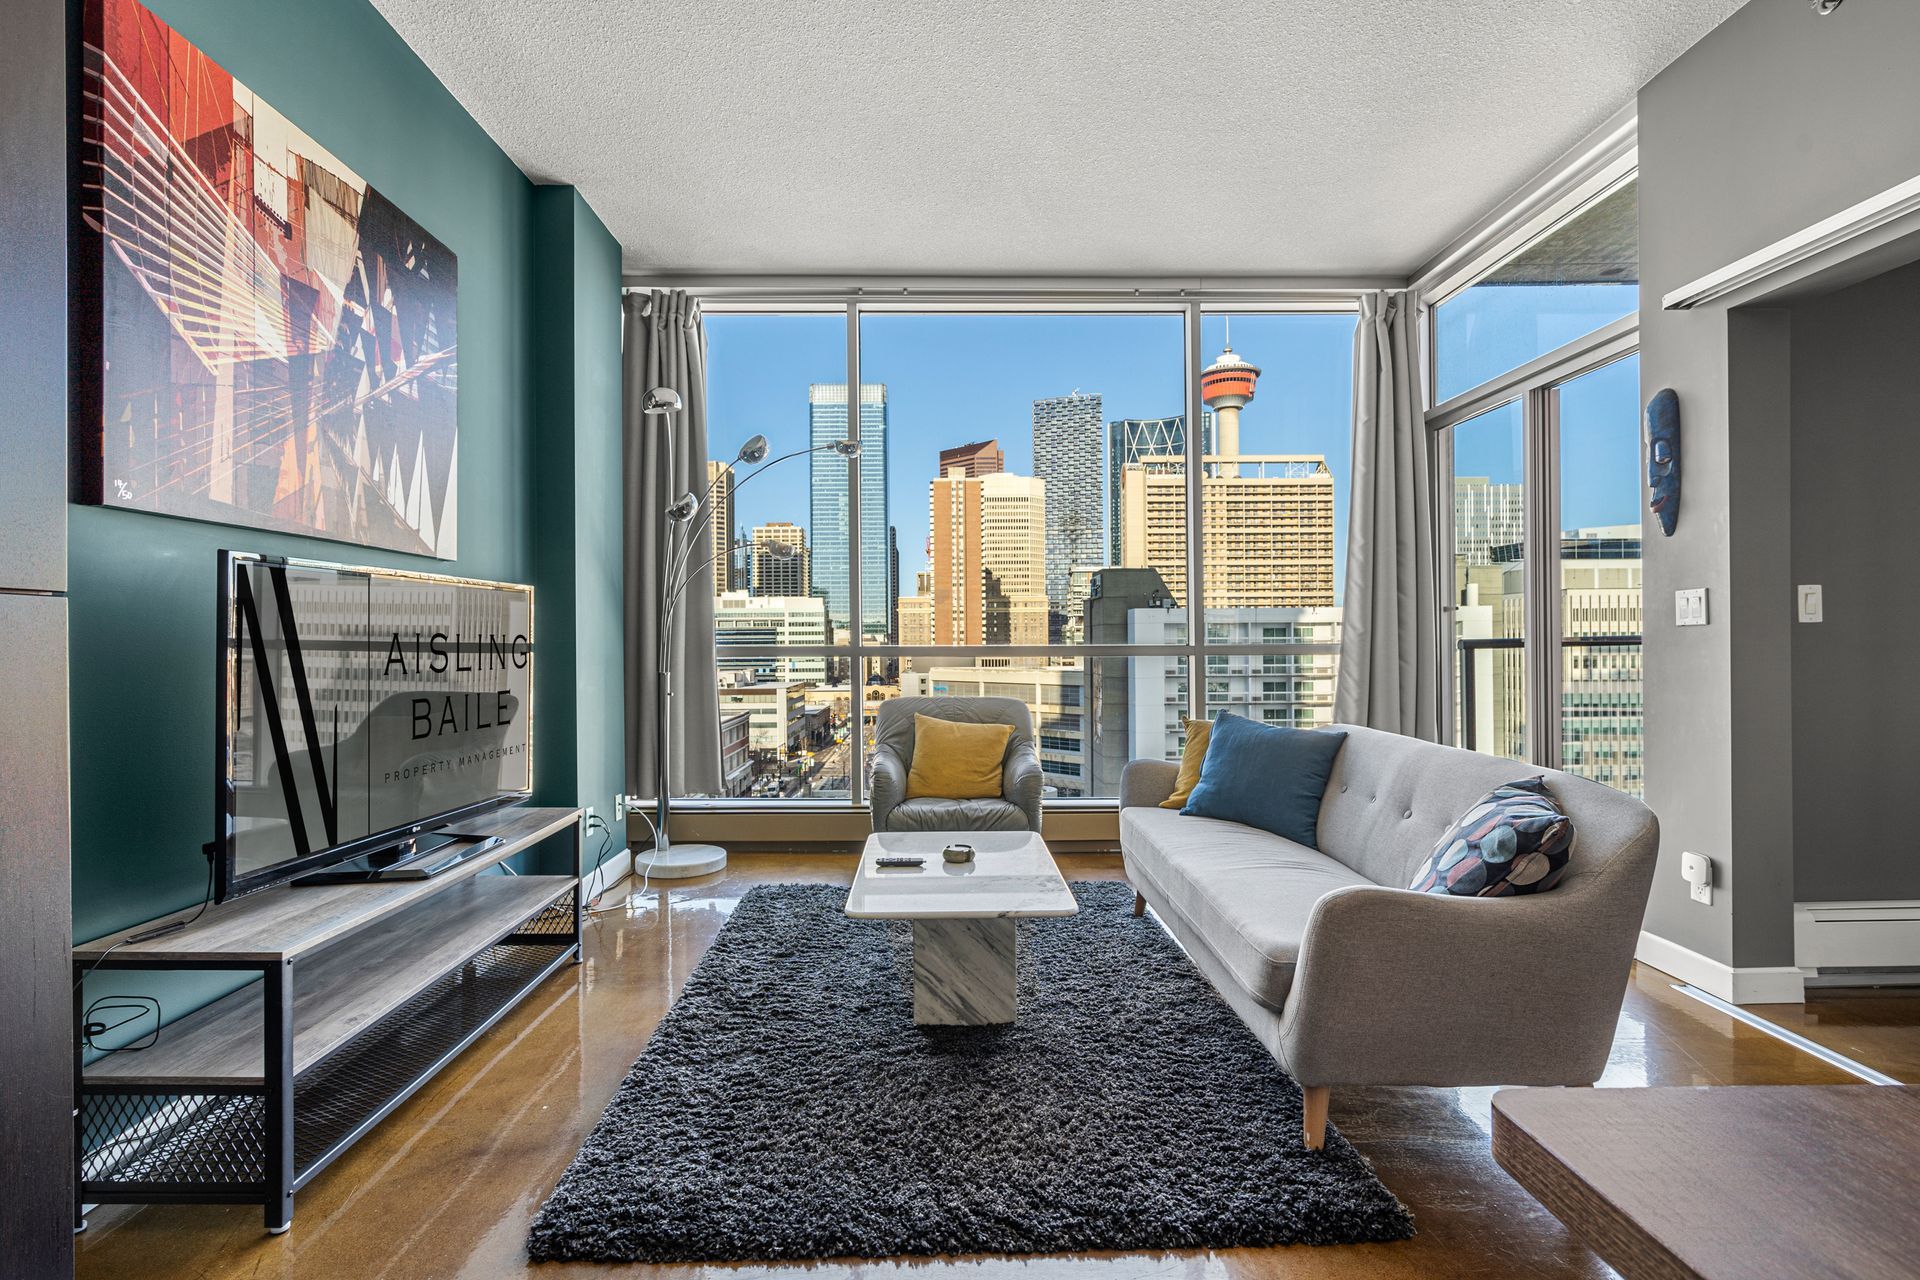 Living room of All My Fave Colours a Calgary short-term rental hosted by Aisling Baile Property Management.